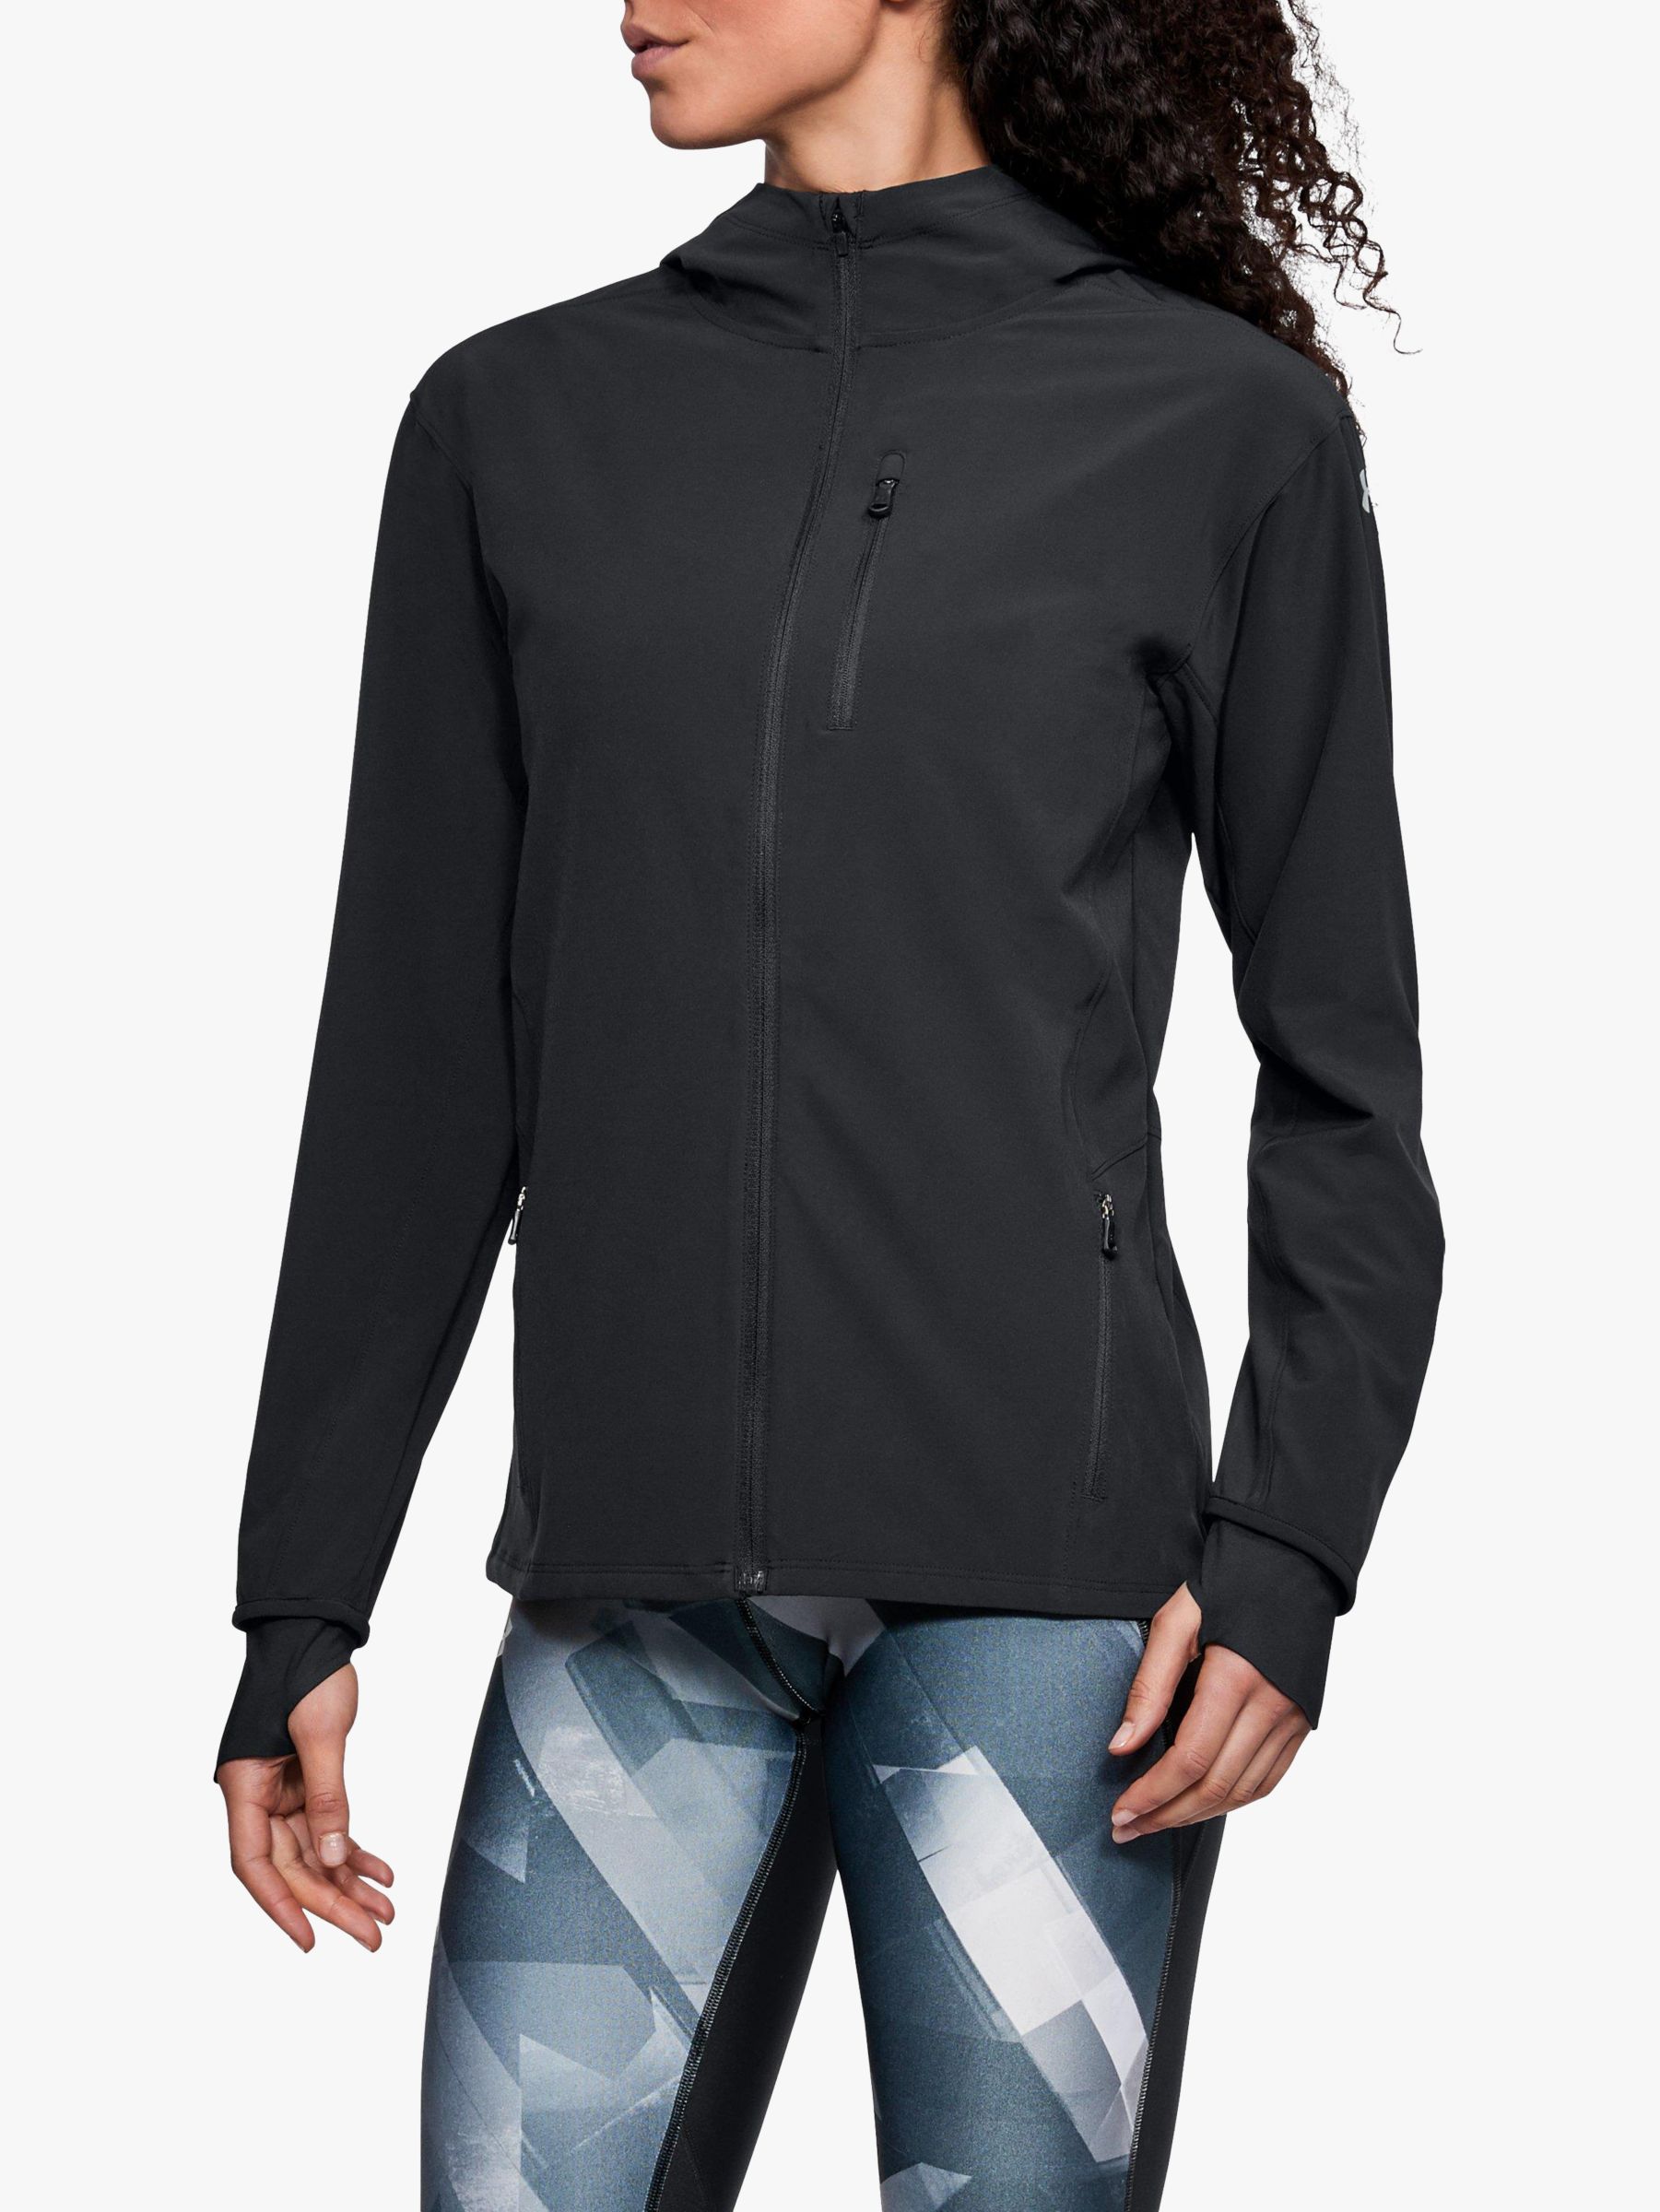 Under Armour Outrun The Storm Women's Running Jacket, Black/Reflective